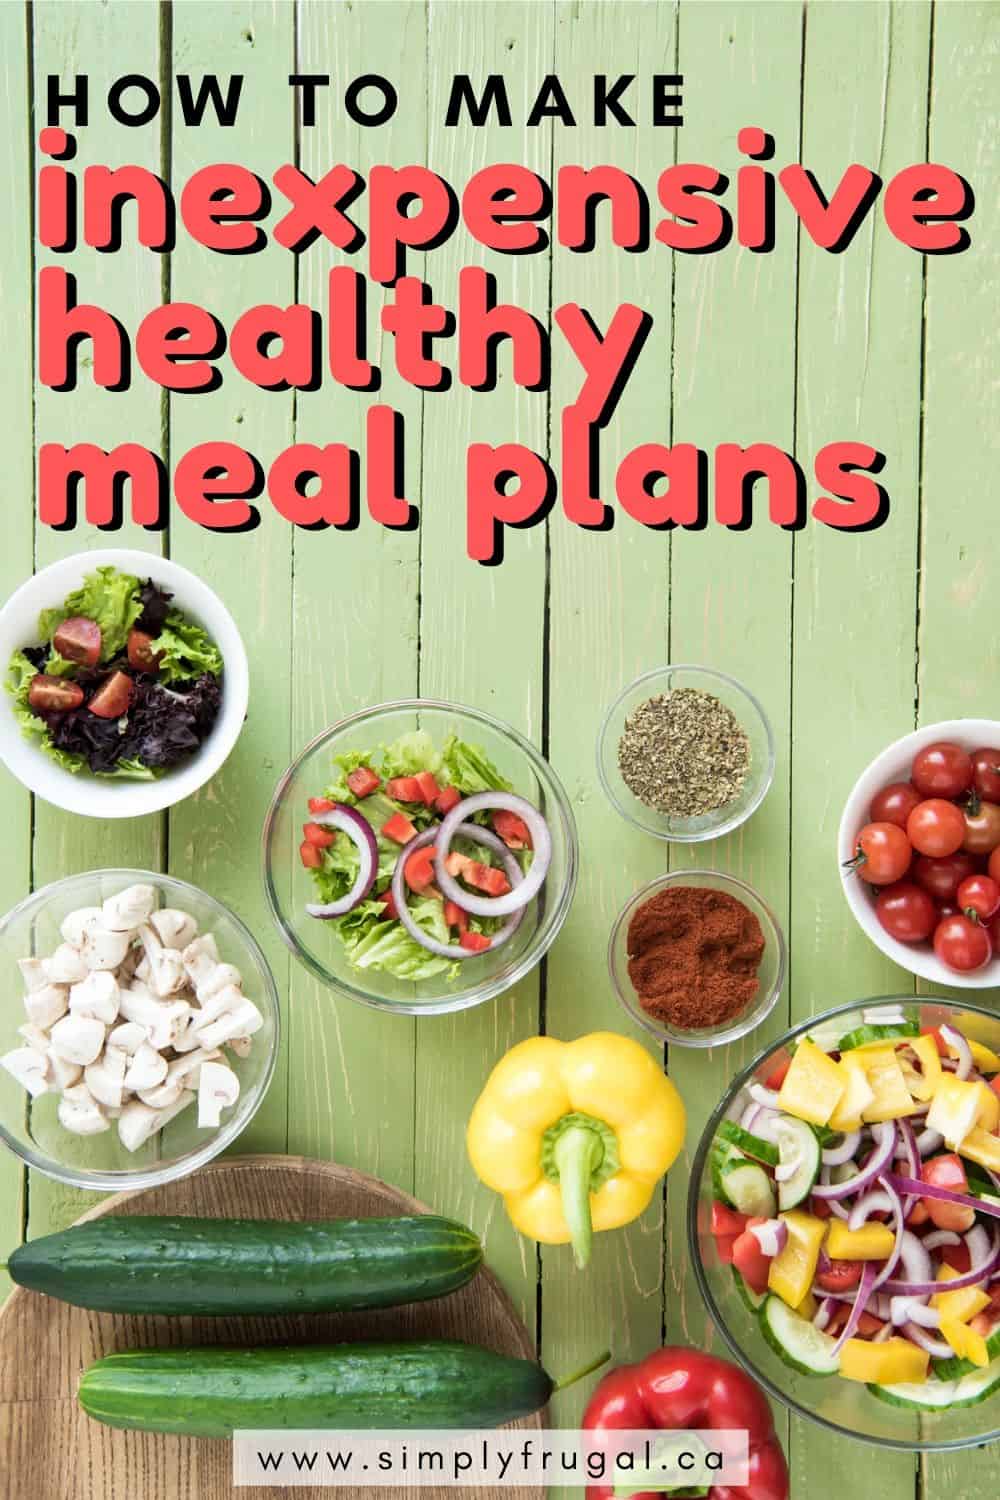 How to make an inexpensive healthy meal plan for families on a budget